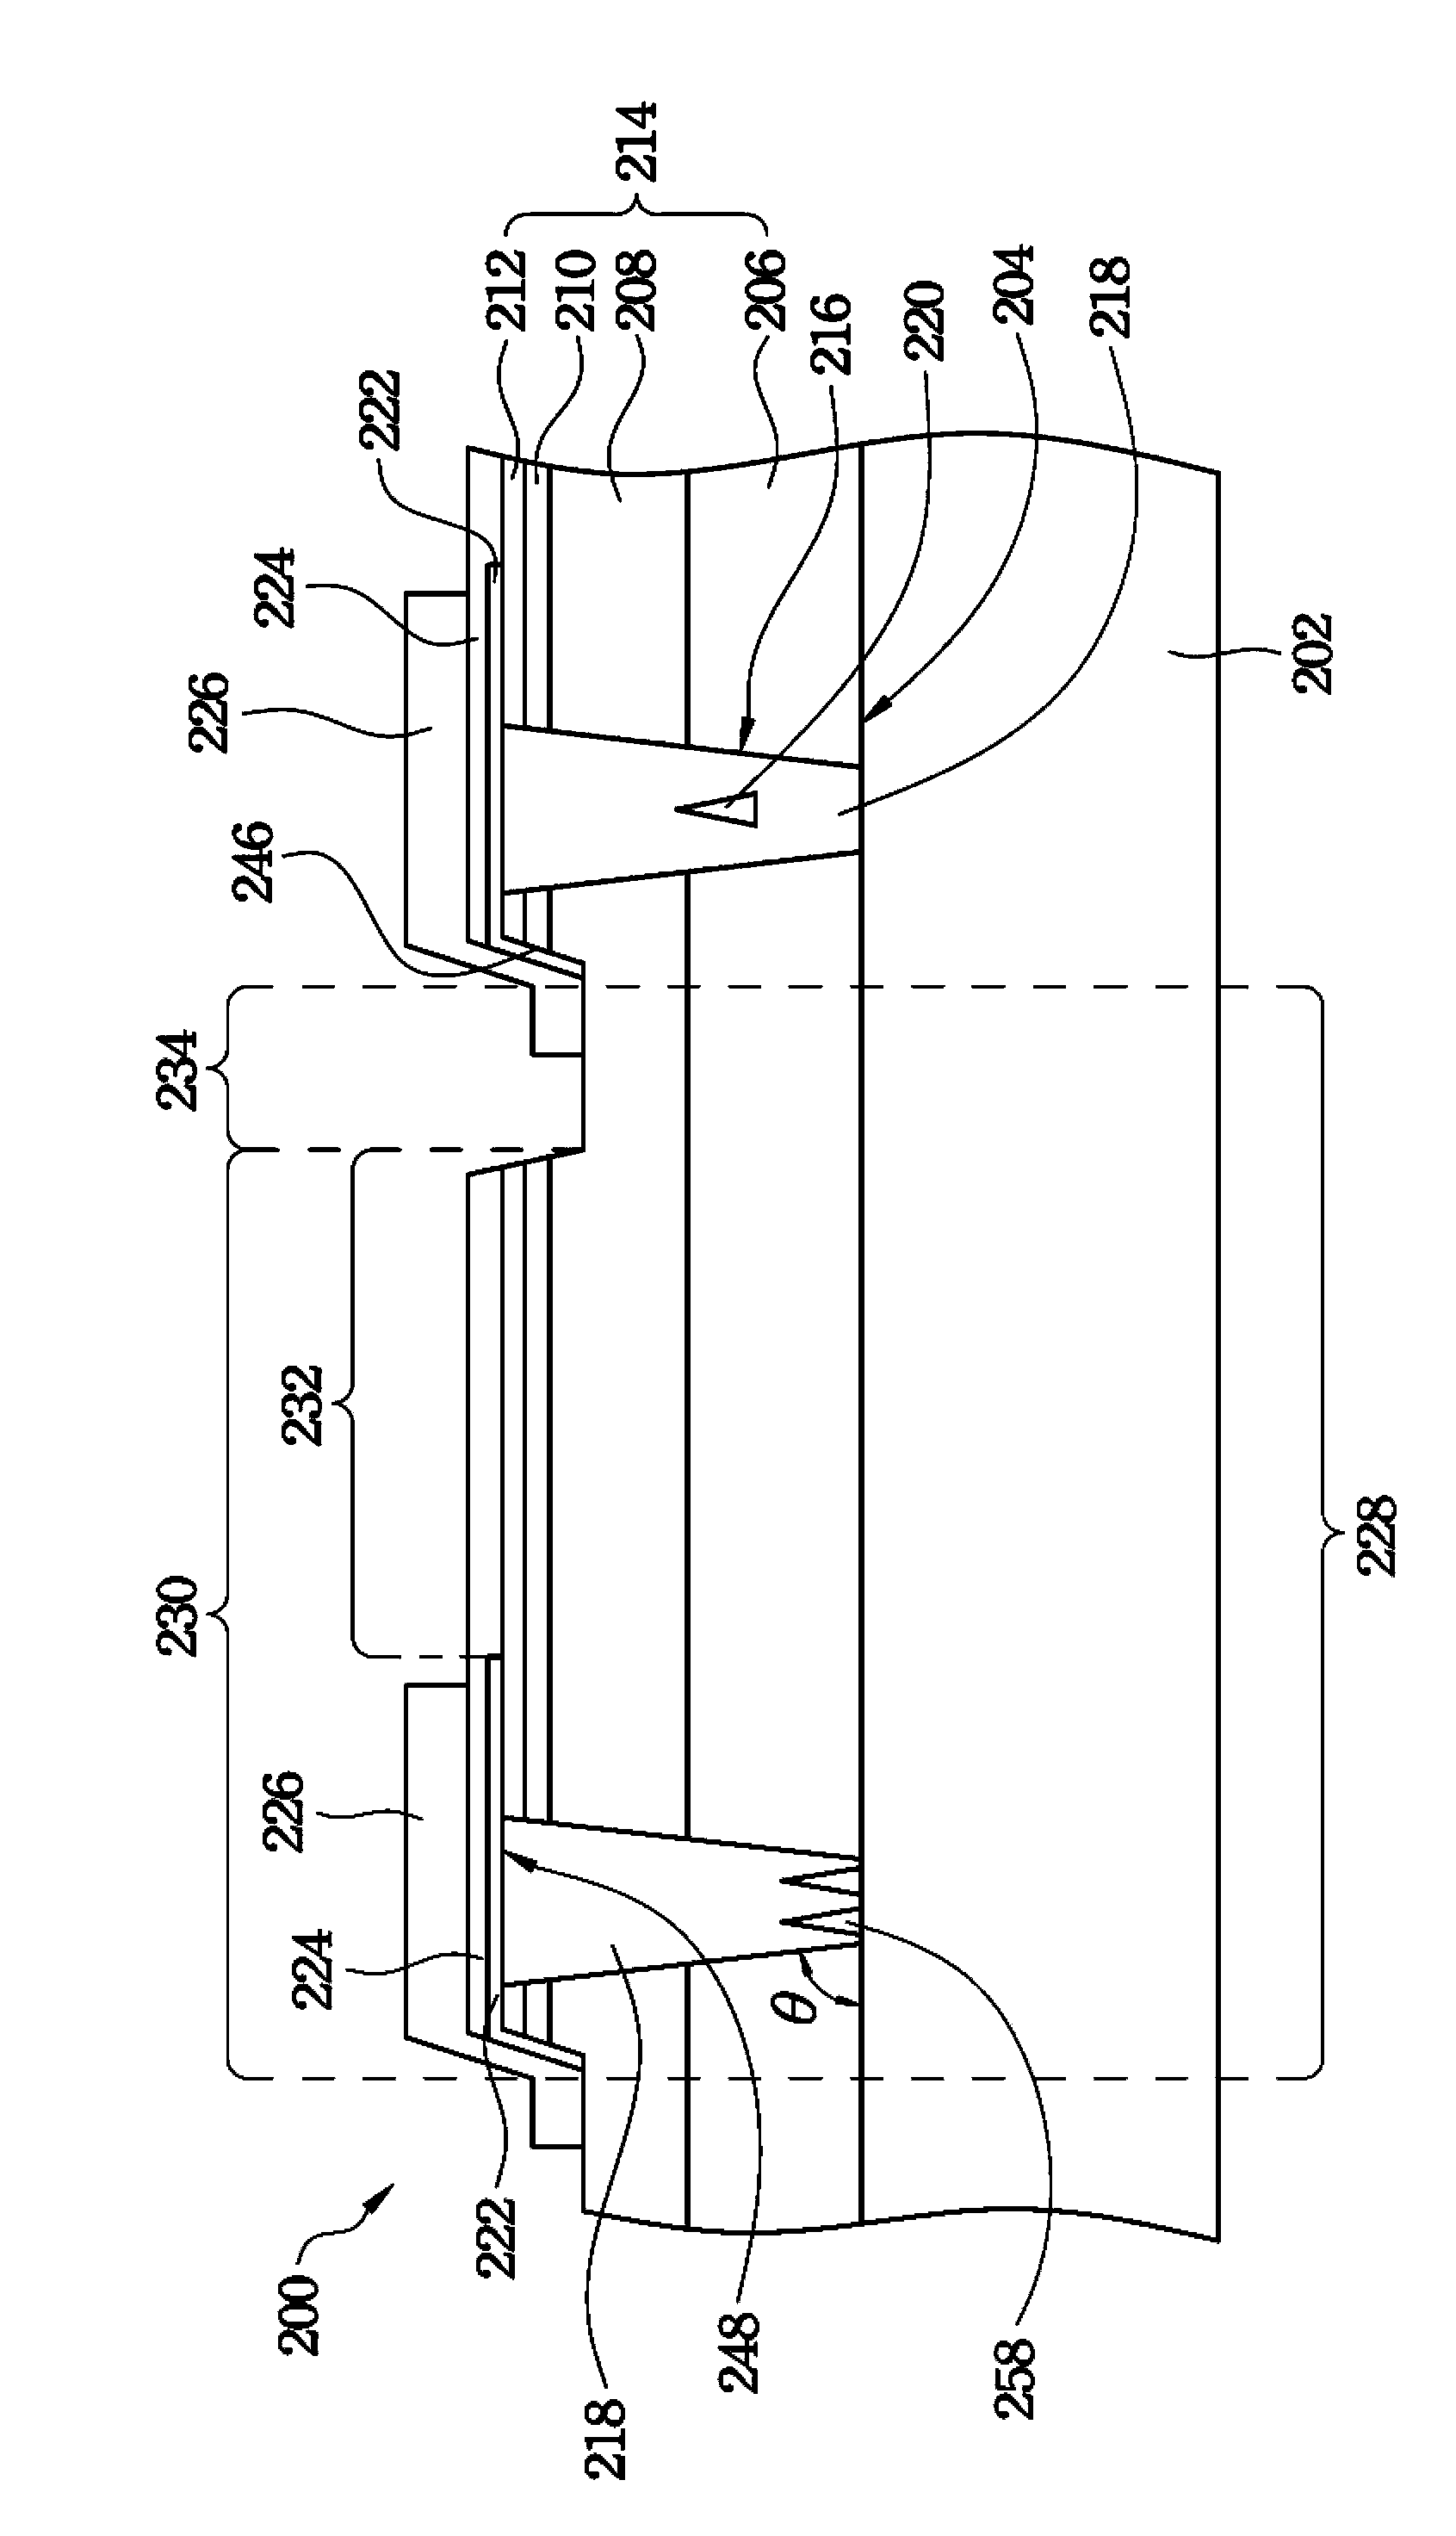 Light-emitting diode structure and method for manufacturing the same